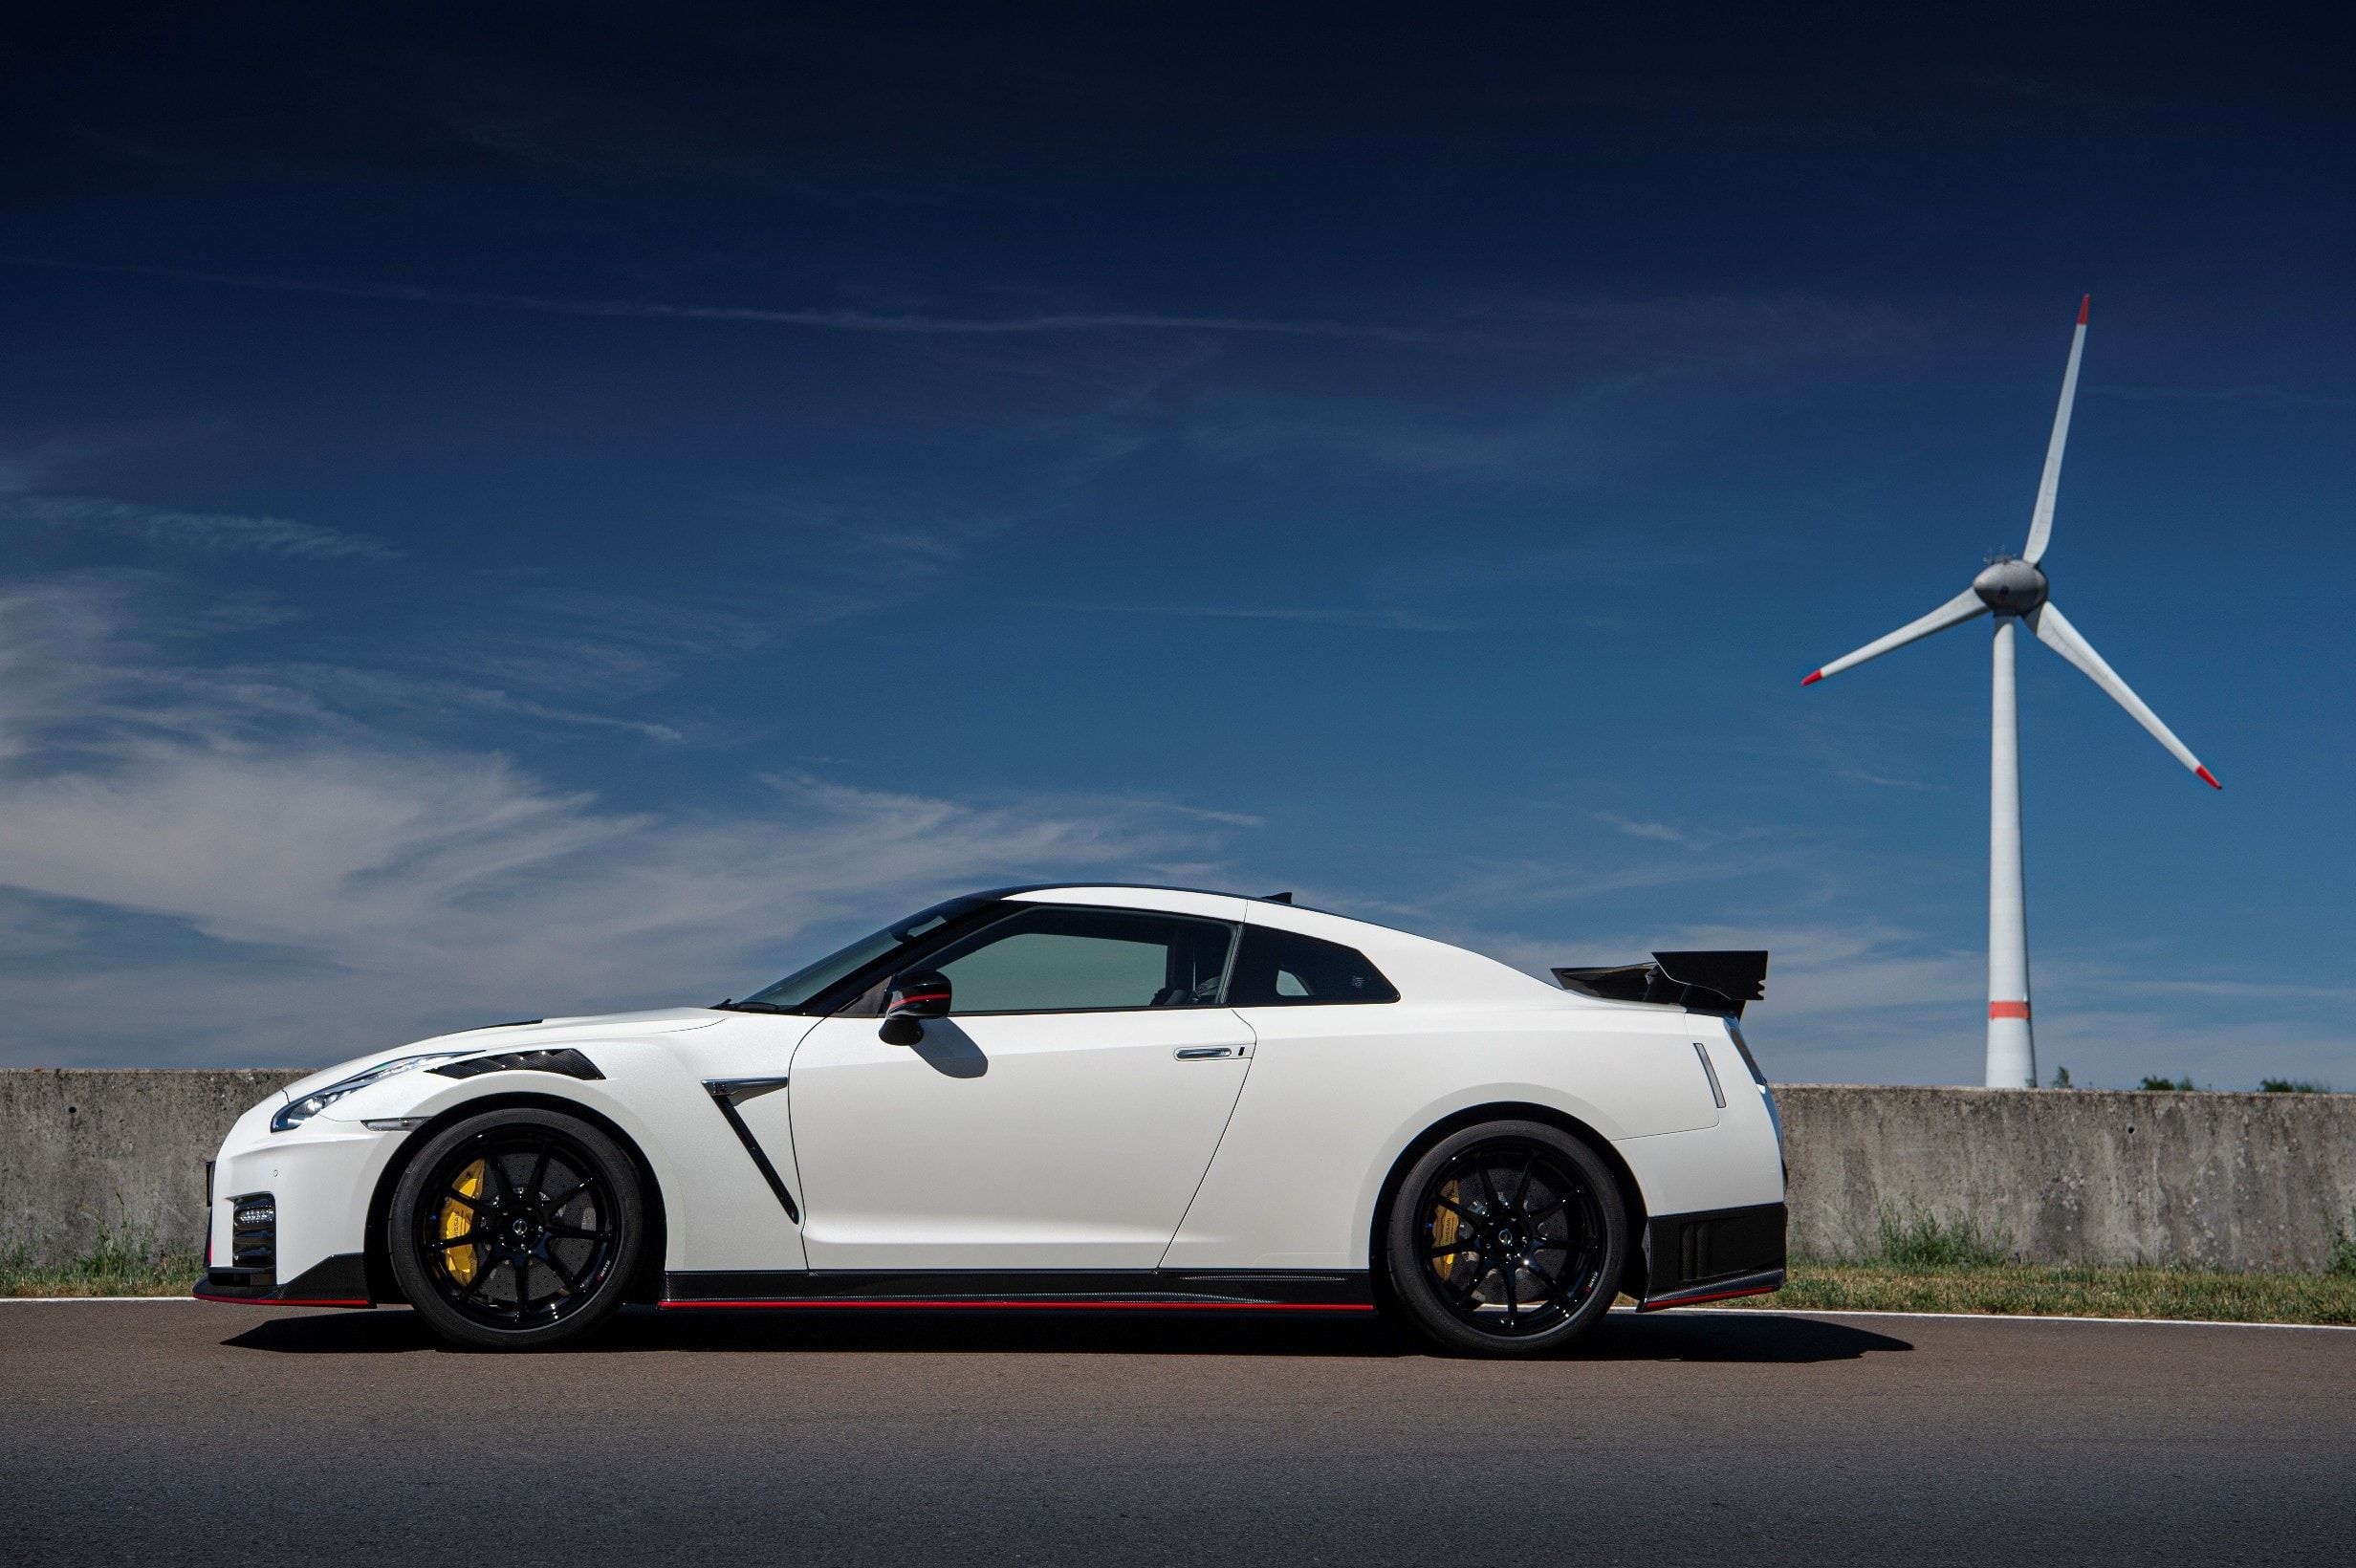 2022 Nissan Gt R Rumored With Mild Hybrid Assist Final Edition With